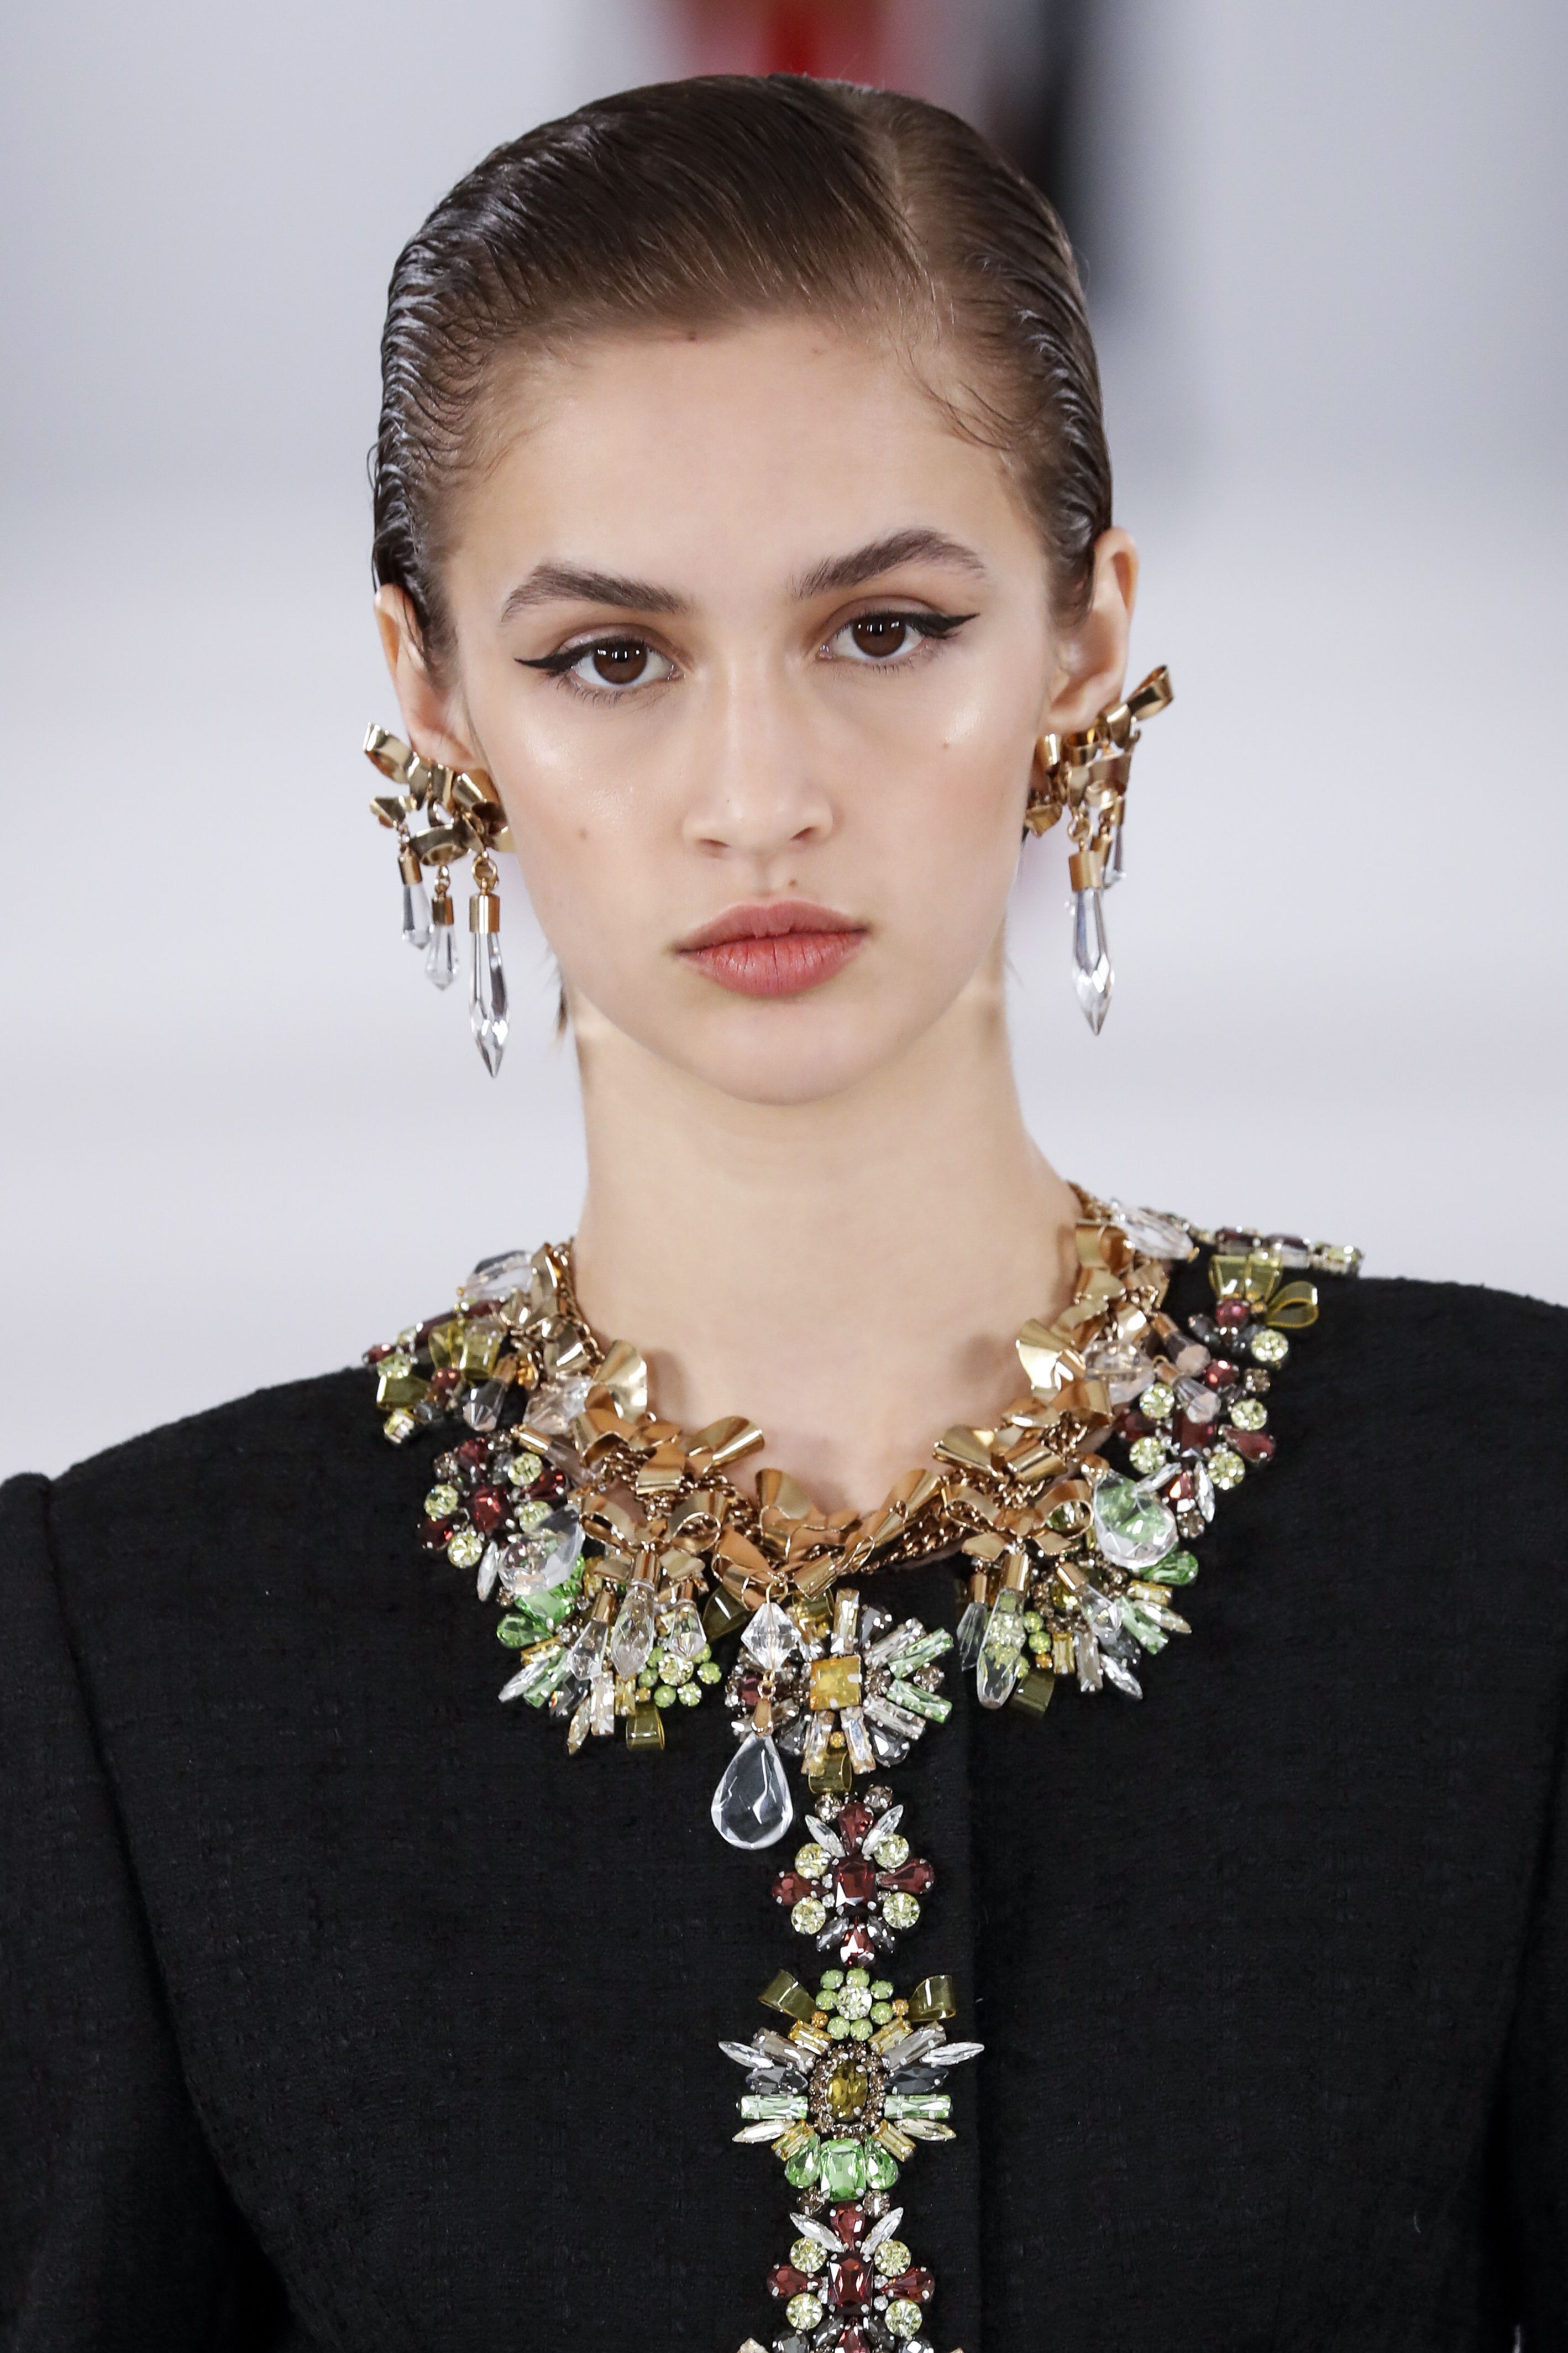 Fashion Trends For Autumn/Winter 2022 - Jewelry & Accessories -  Nihaojewelry Blog